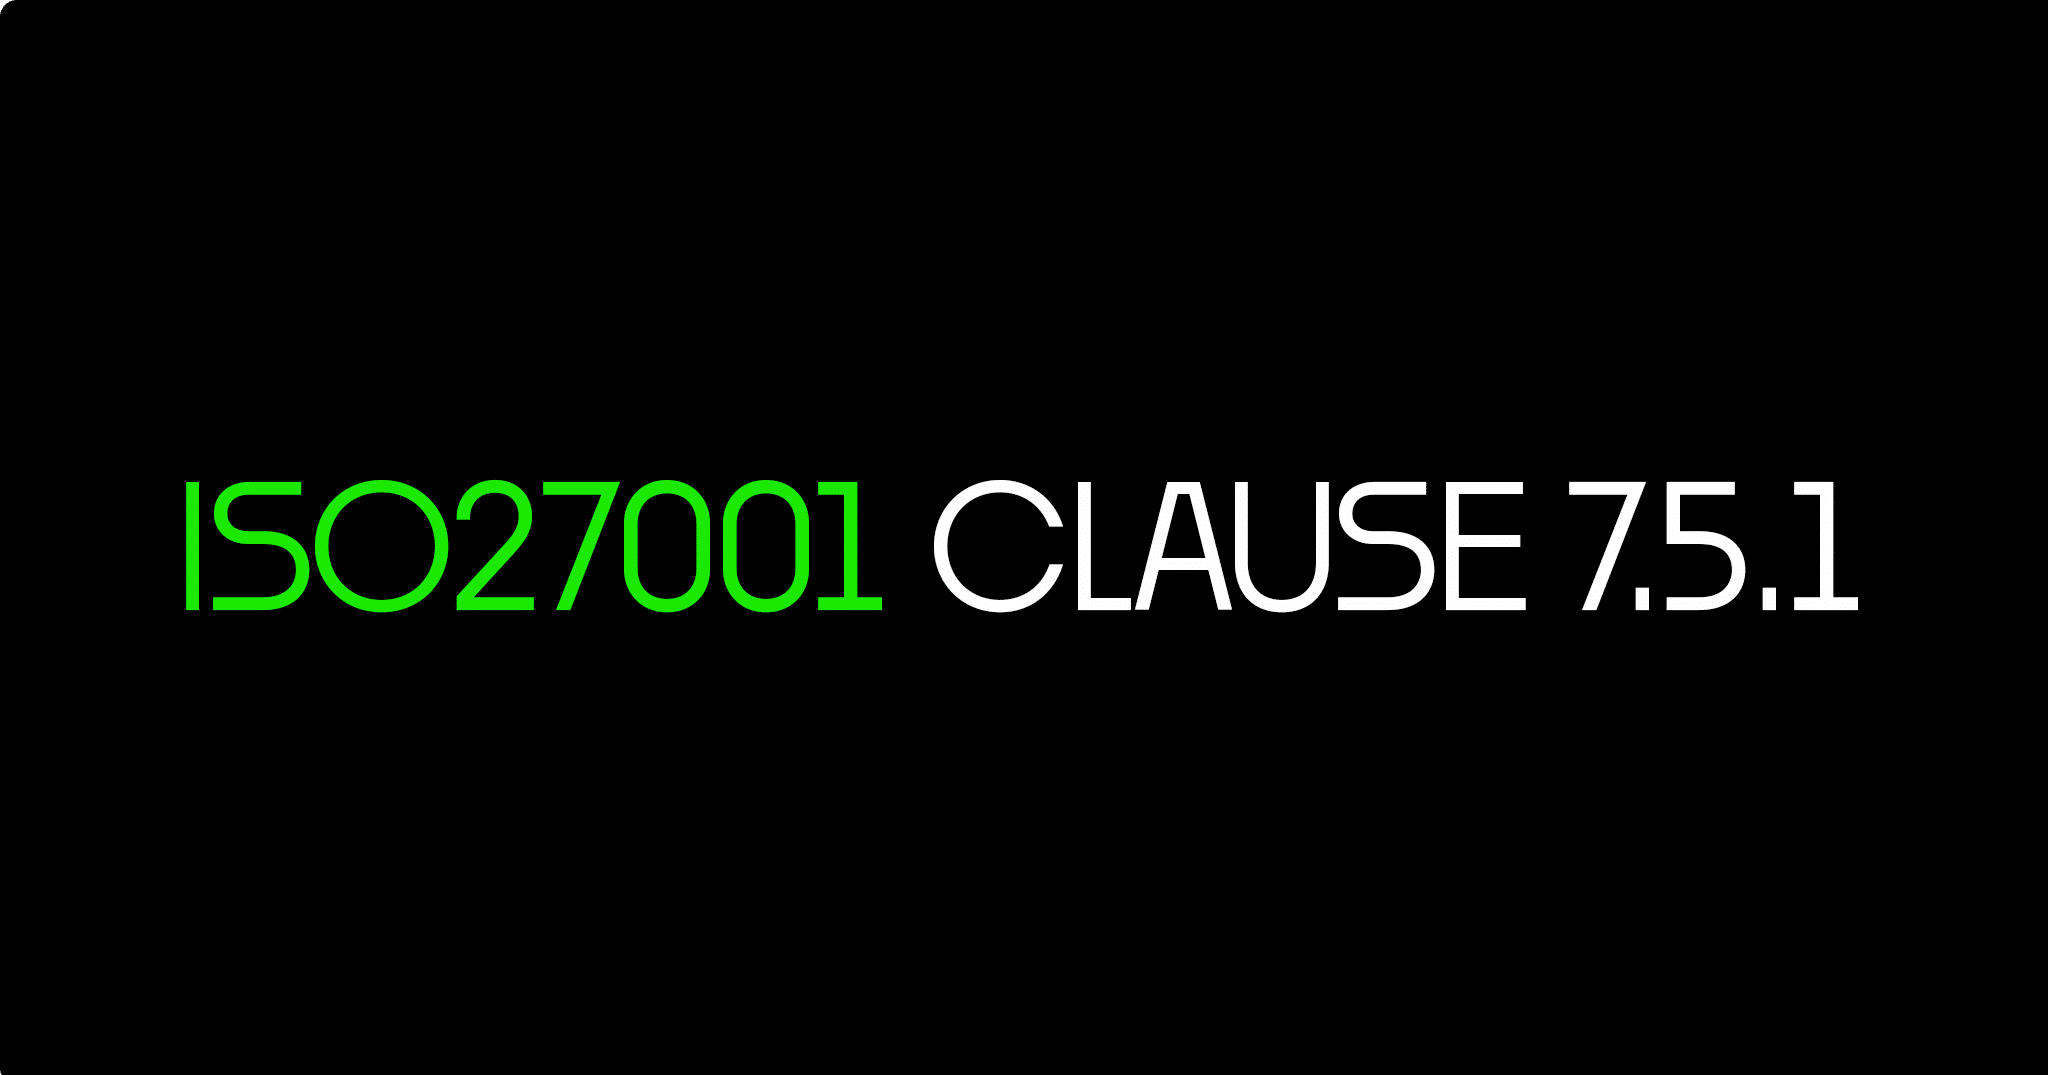 ISO 27001 Clause 7.5.1 Documented Information – Ultimate Certification Guide